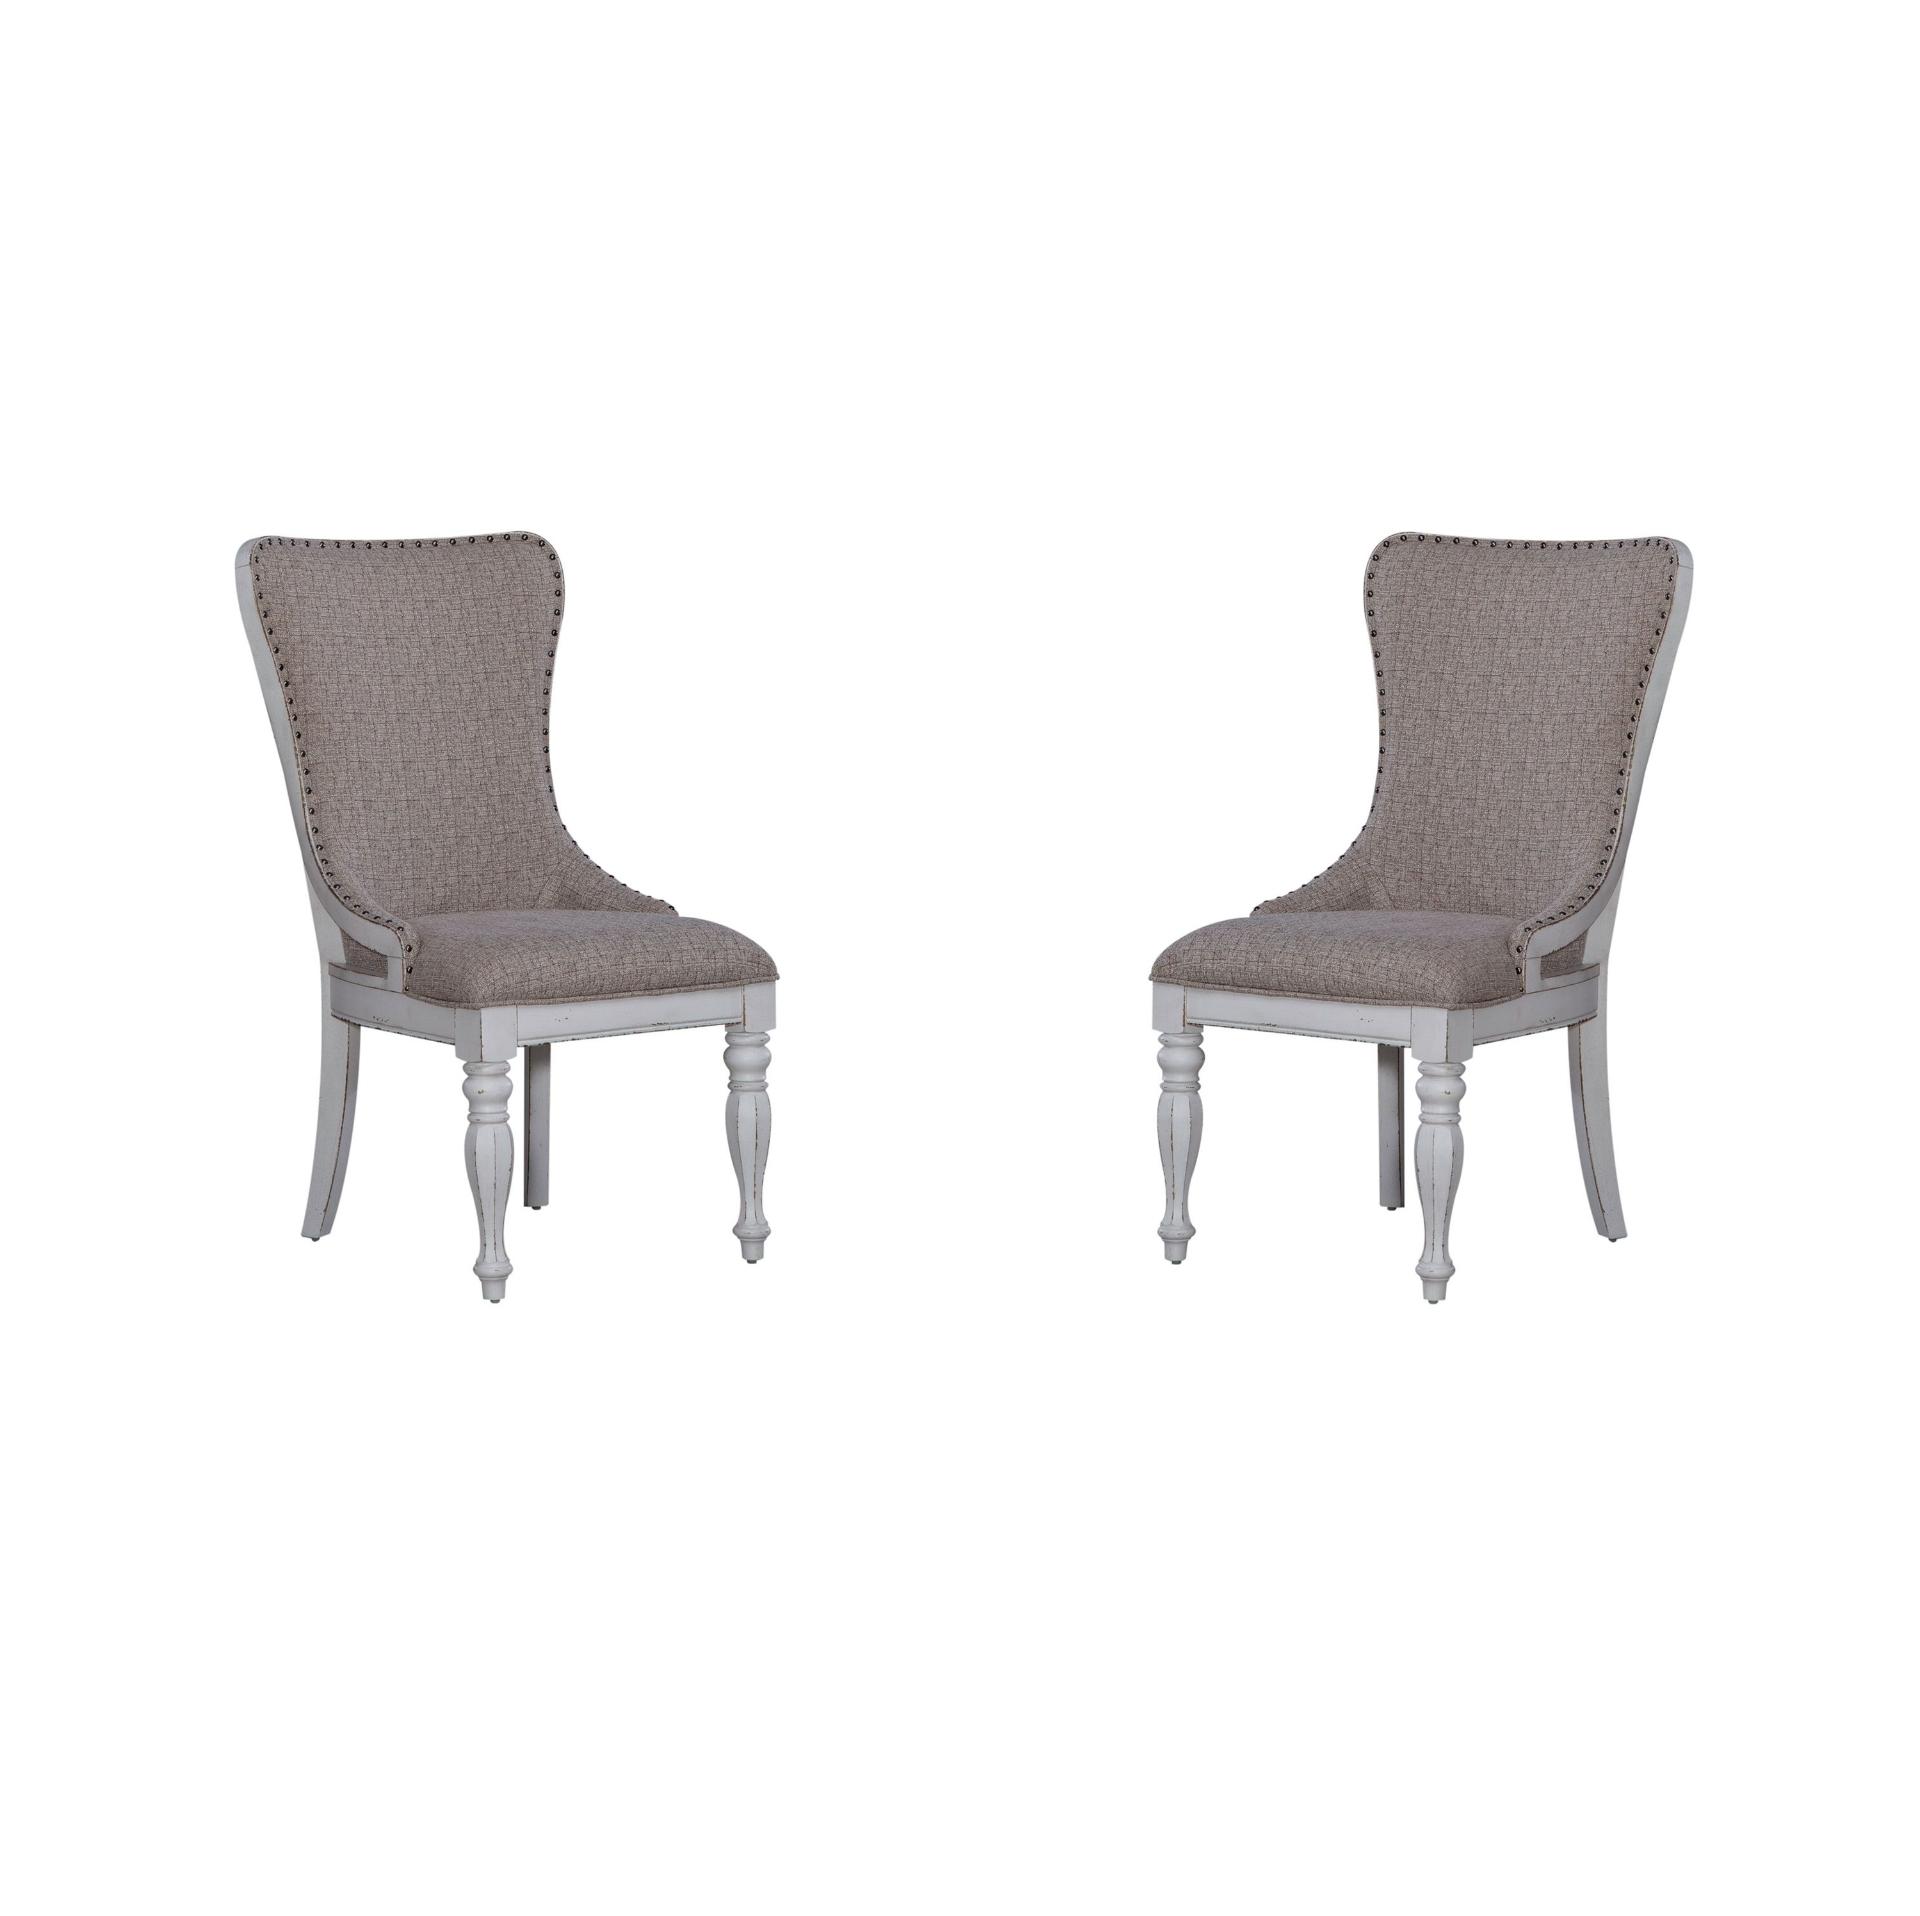 European Traditional Dining Chair Set 244-C6501S-Set 244-C6501S-Set-2 in White Chenille